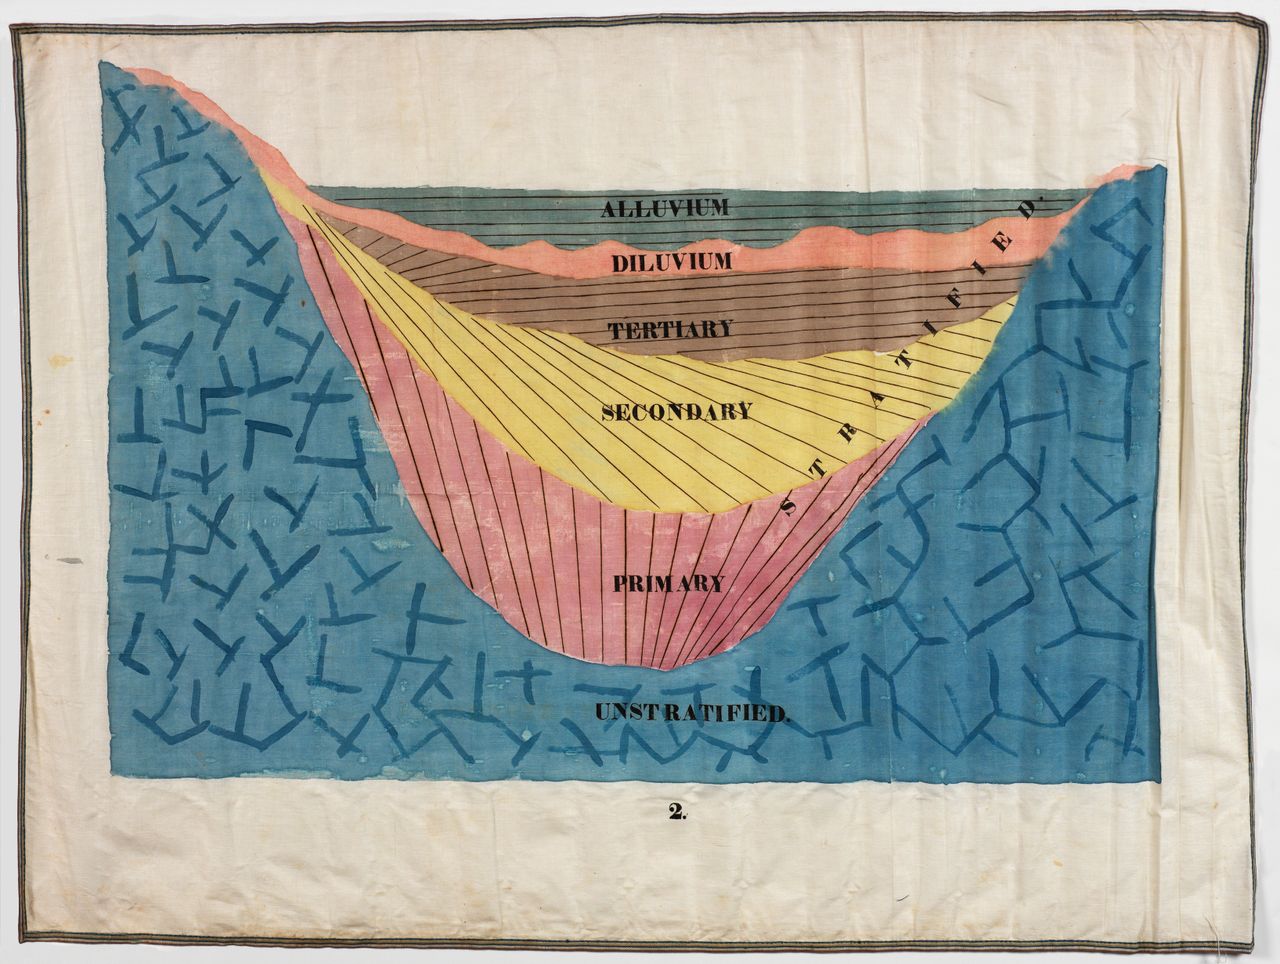 A classroom chart made with pen, ink and watercolor wash on cotton linen drawn by Orra White Hitchcock at Amherst College (1828-1840).